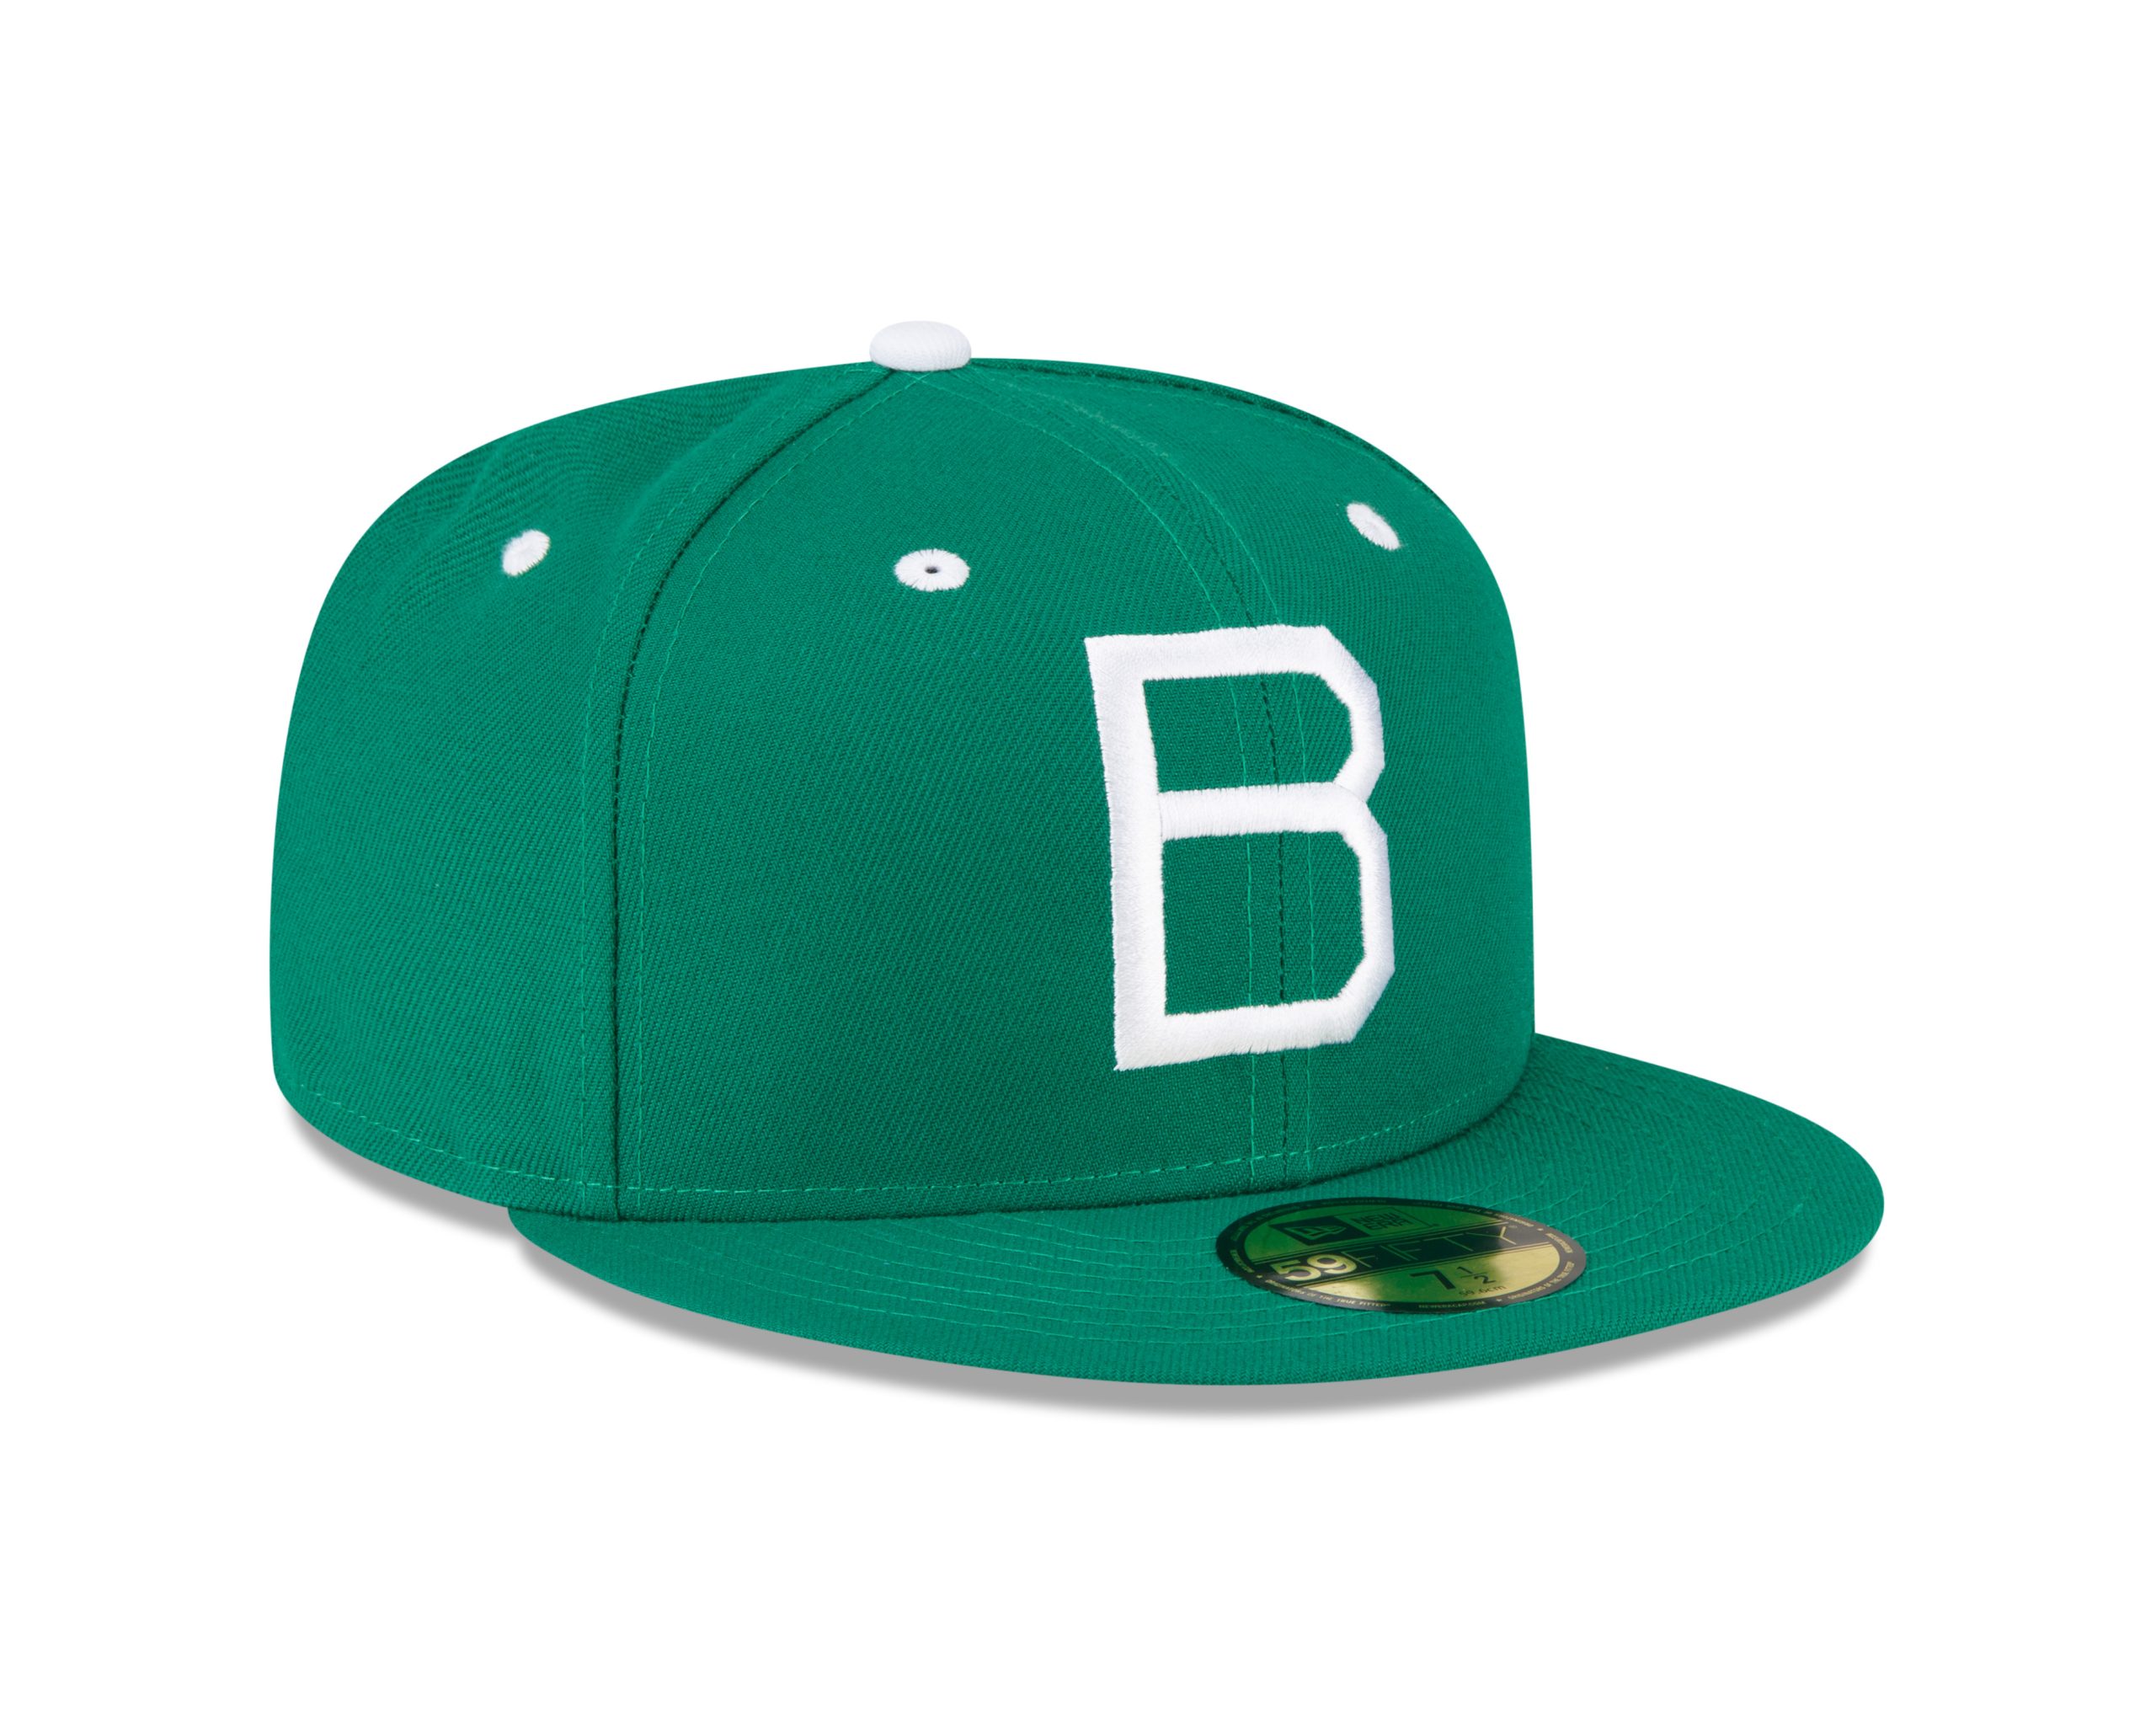 brooklyn dodgers hat cooperstown collection